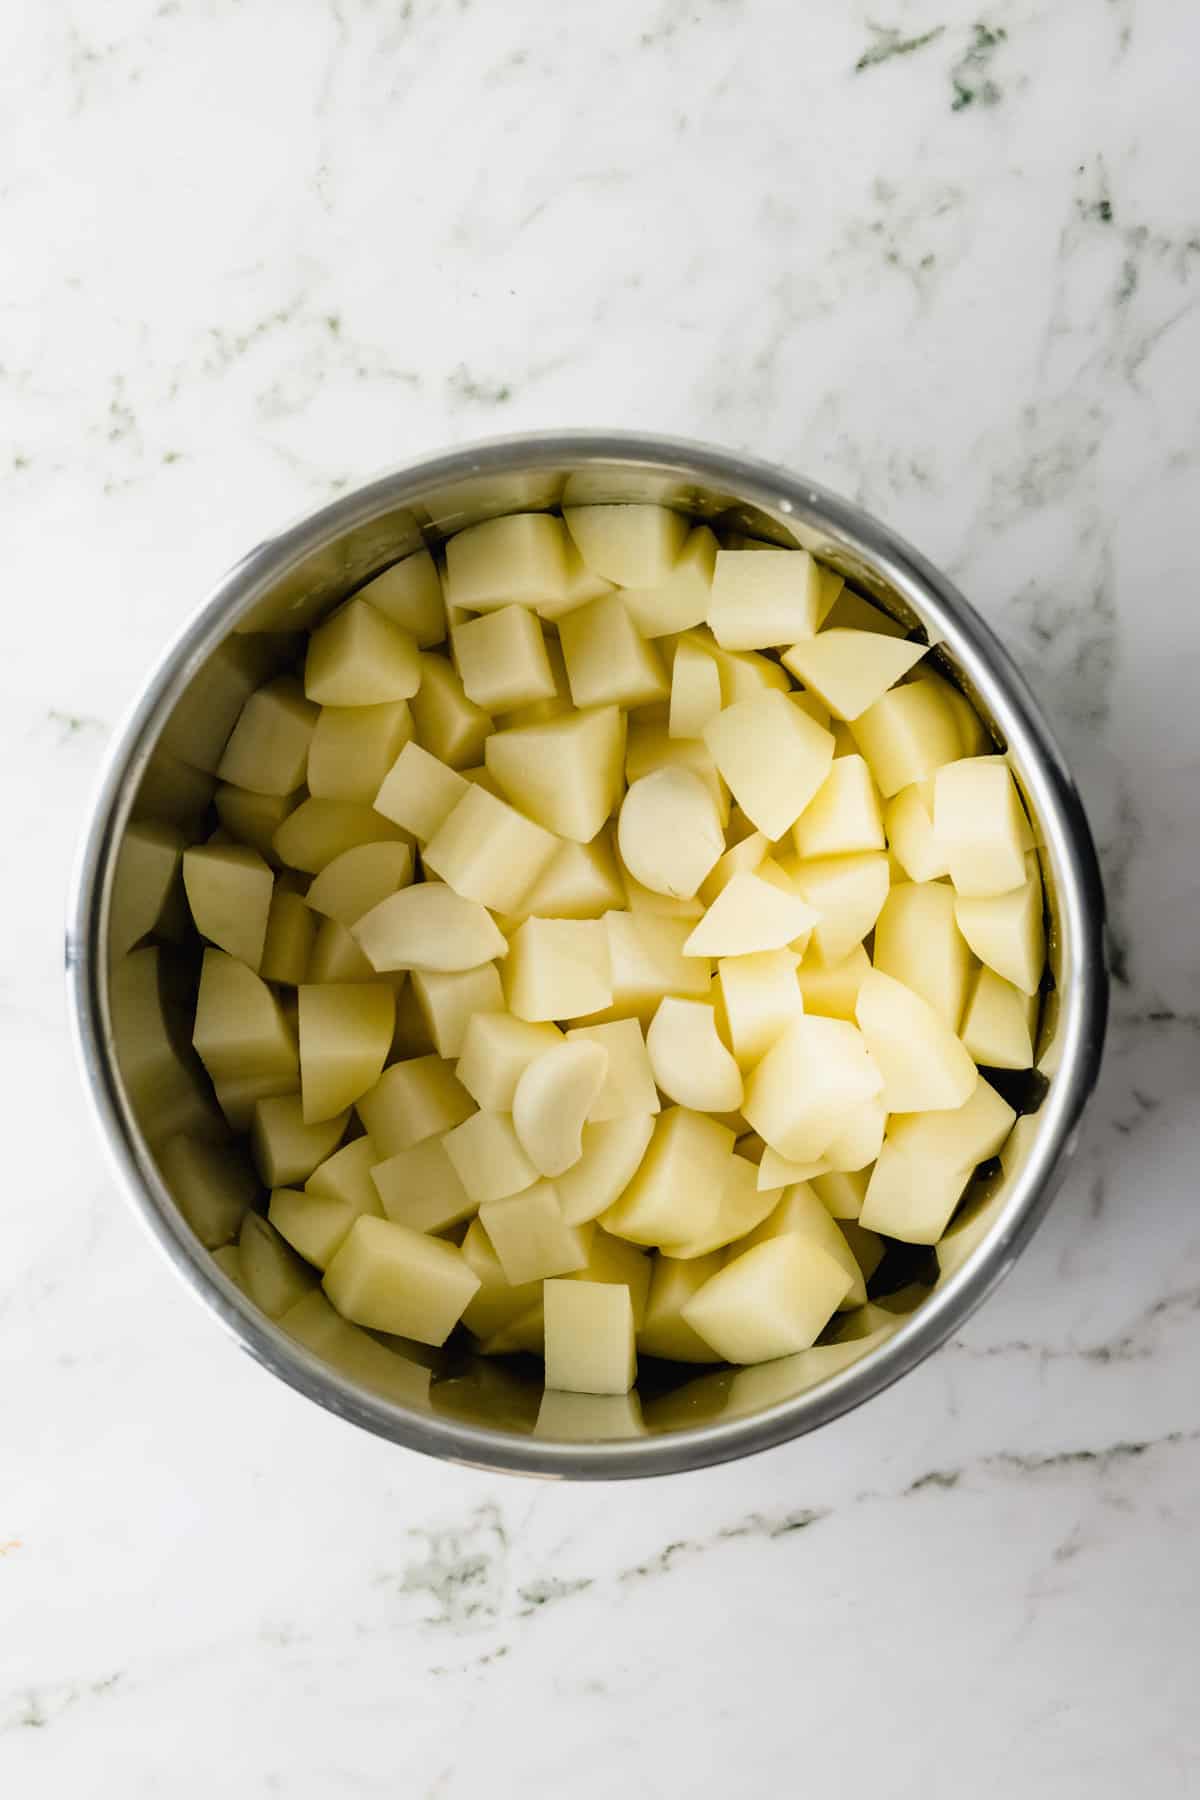 Overhead view of pot with cubed potatoes.